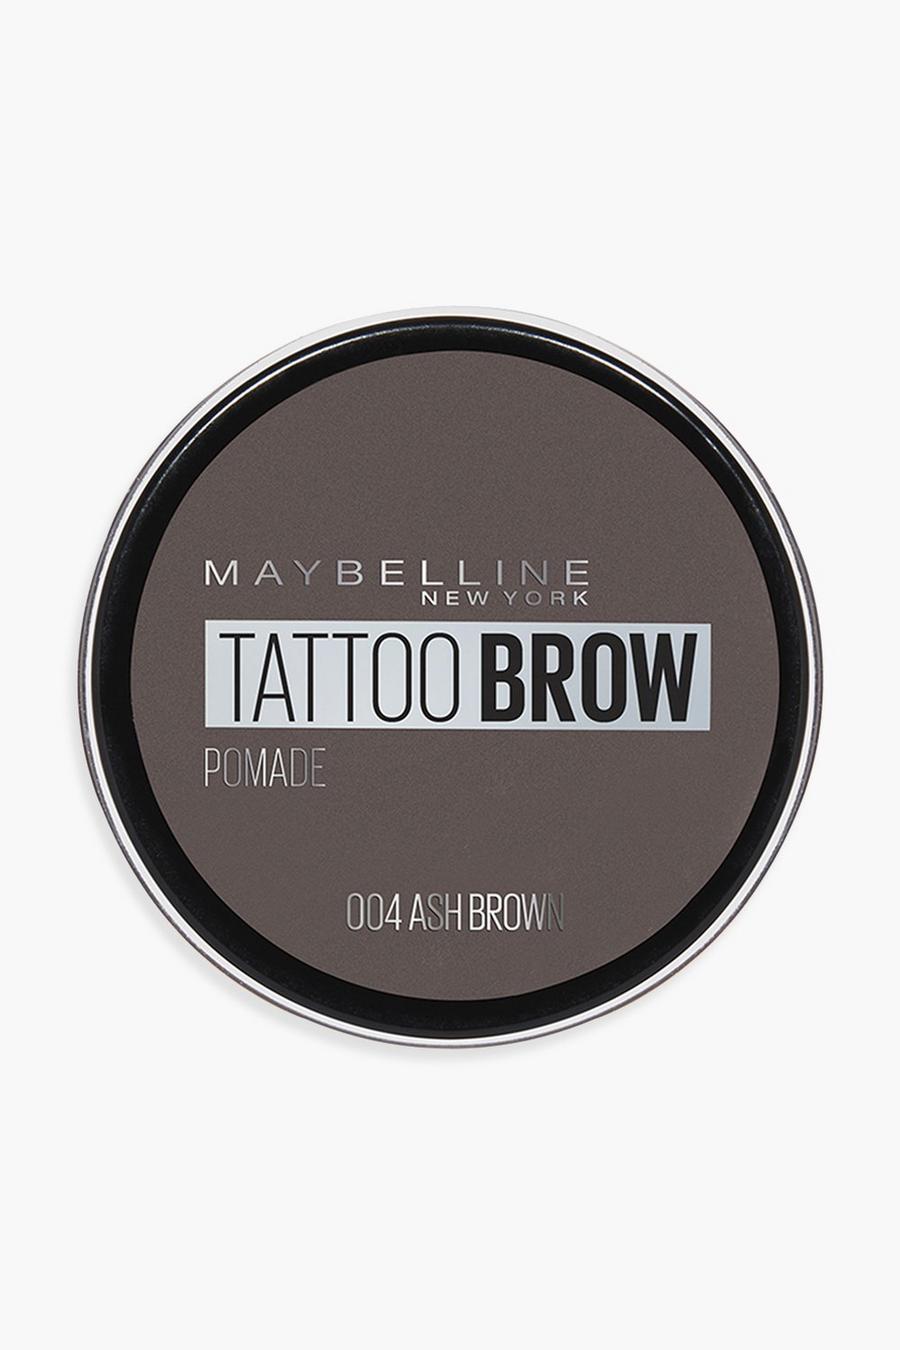 Maybelline Tattoo Brow Augenbrauen-Pomade, 04 ash brown image number 1